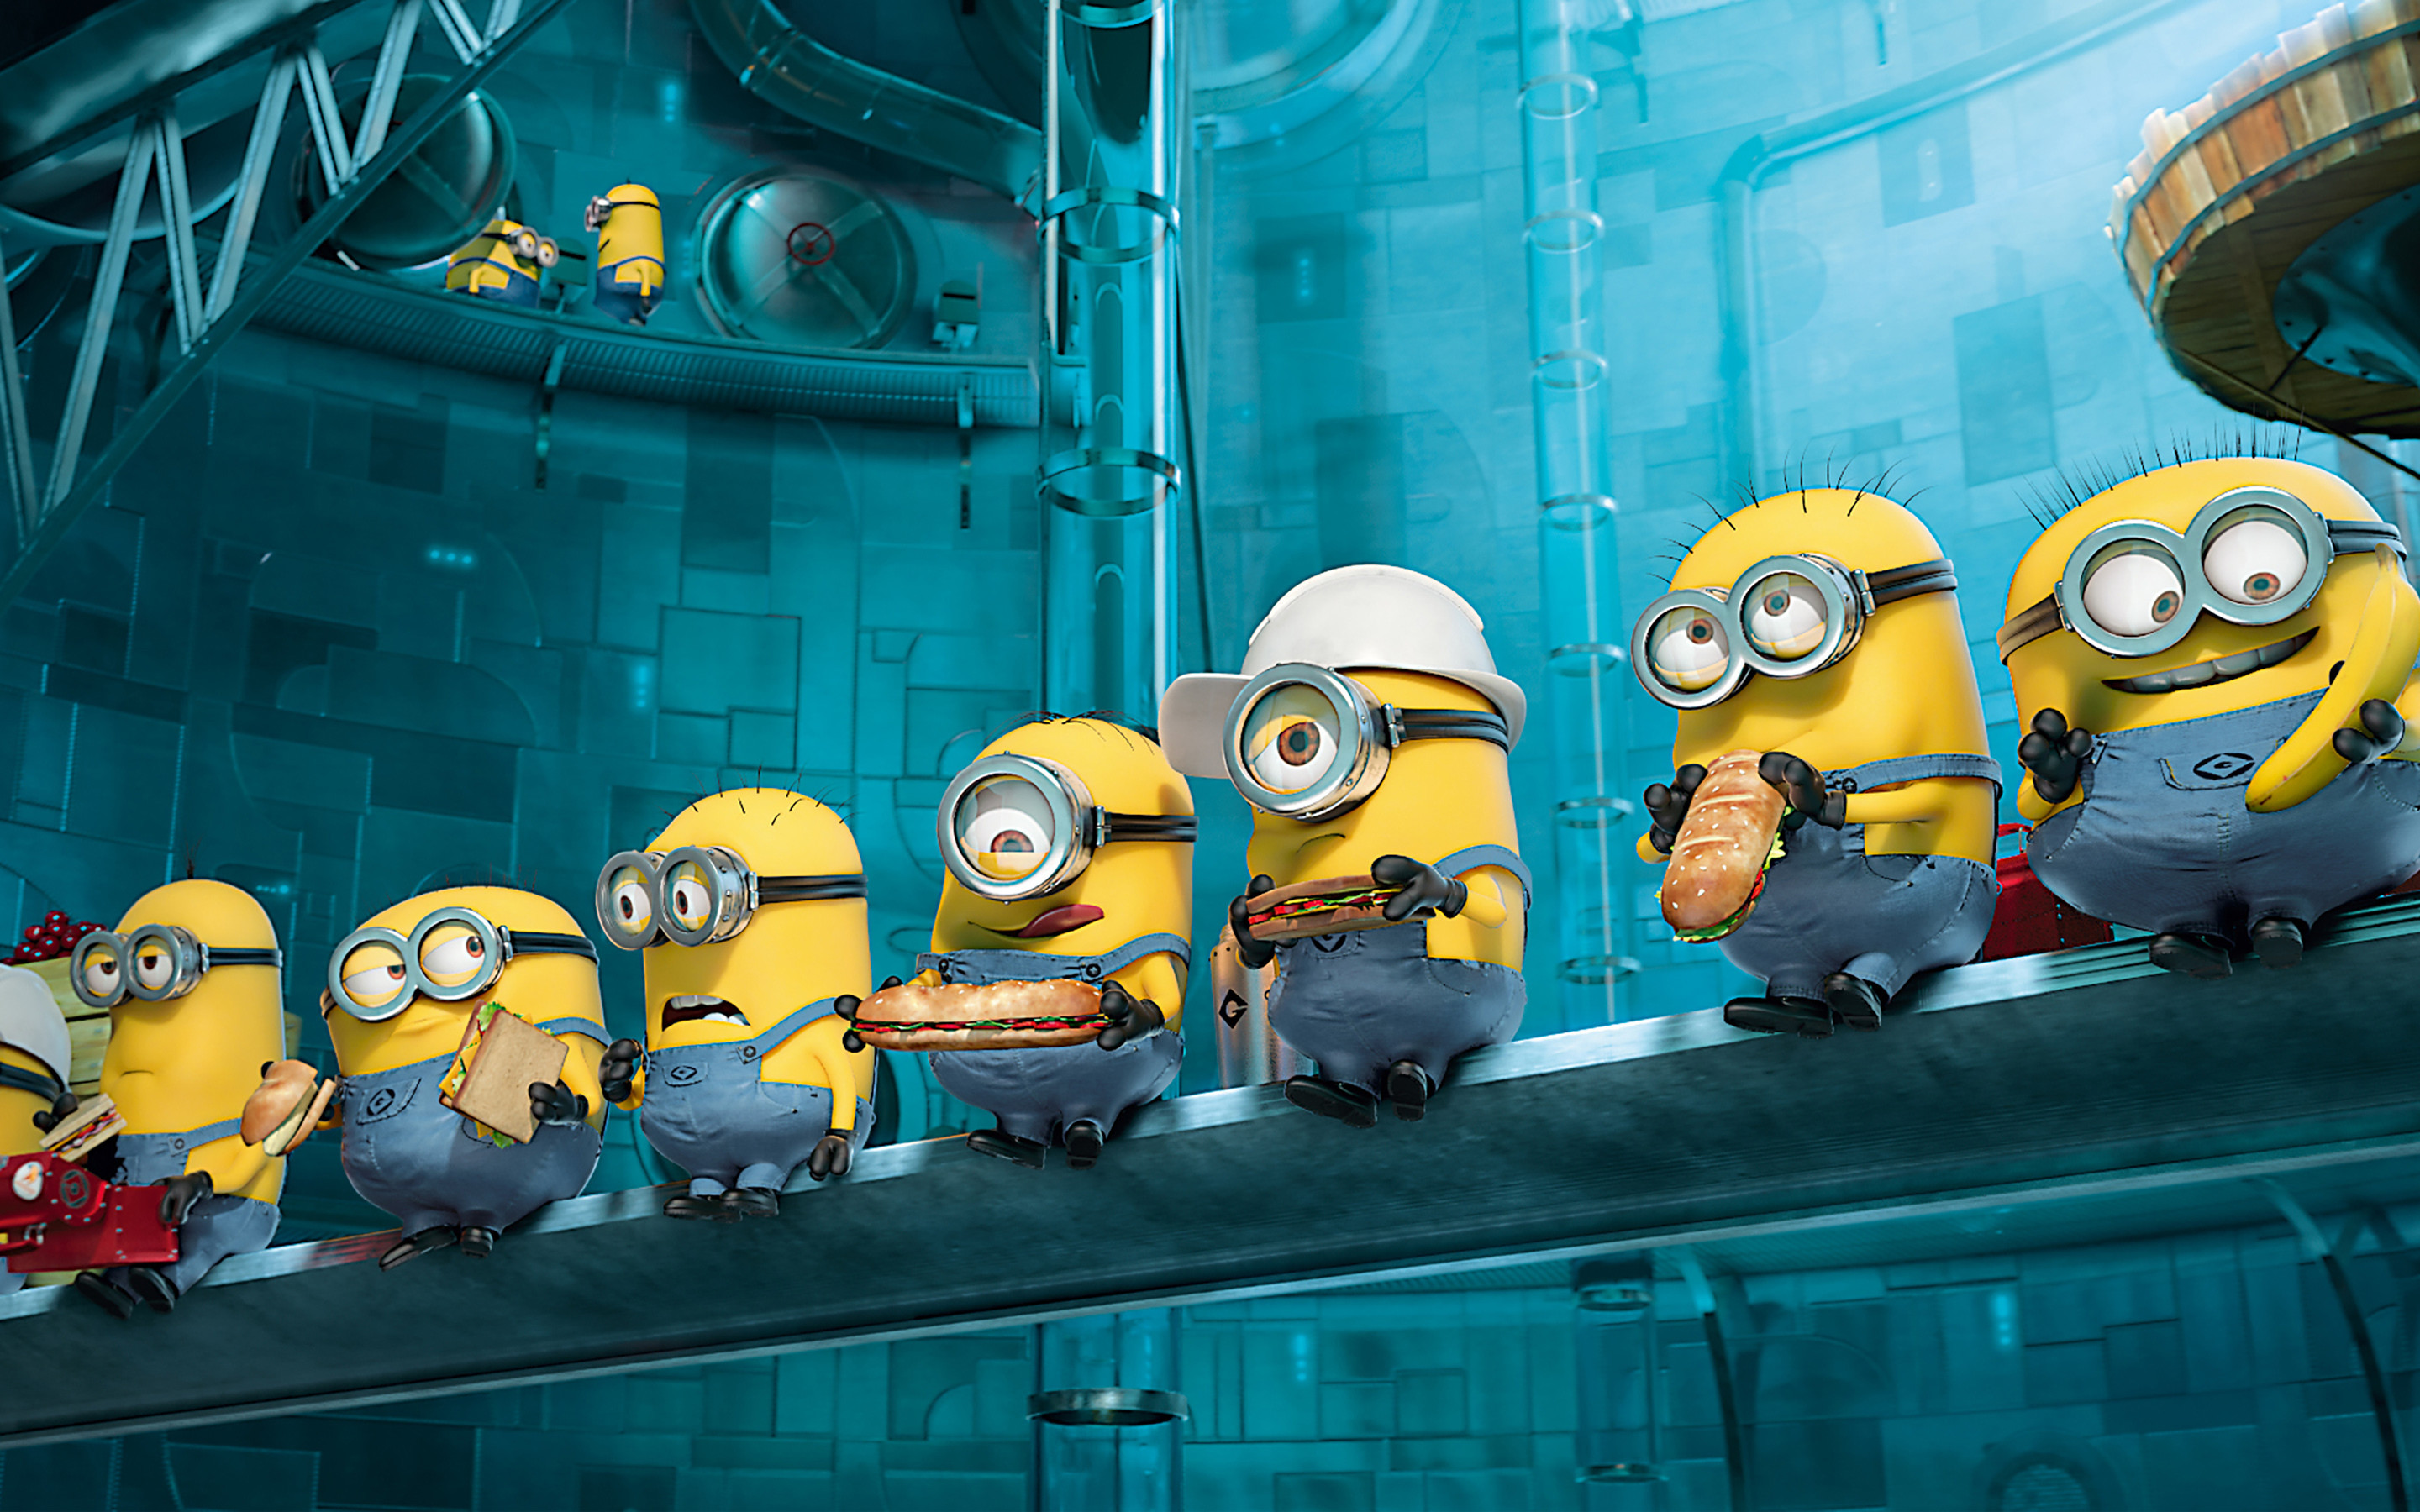 Minion Gadgets Wallpapers, Minion Backgrounds. 1.627 MB